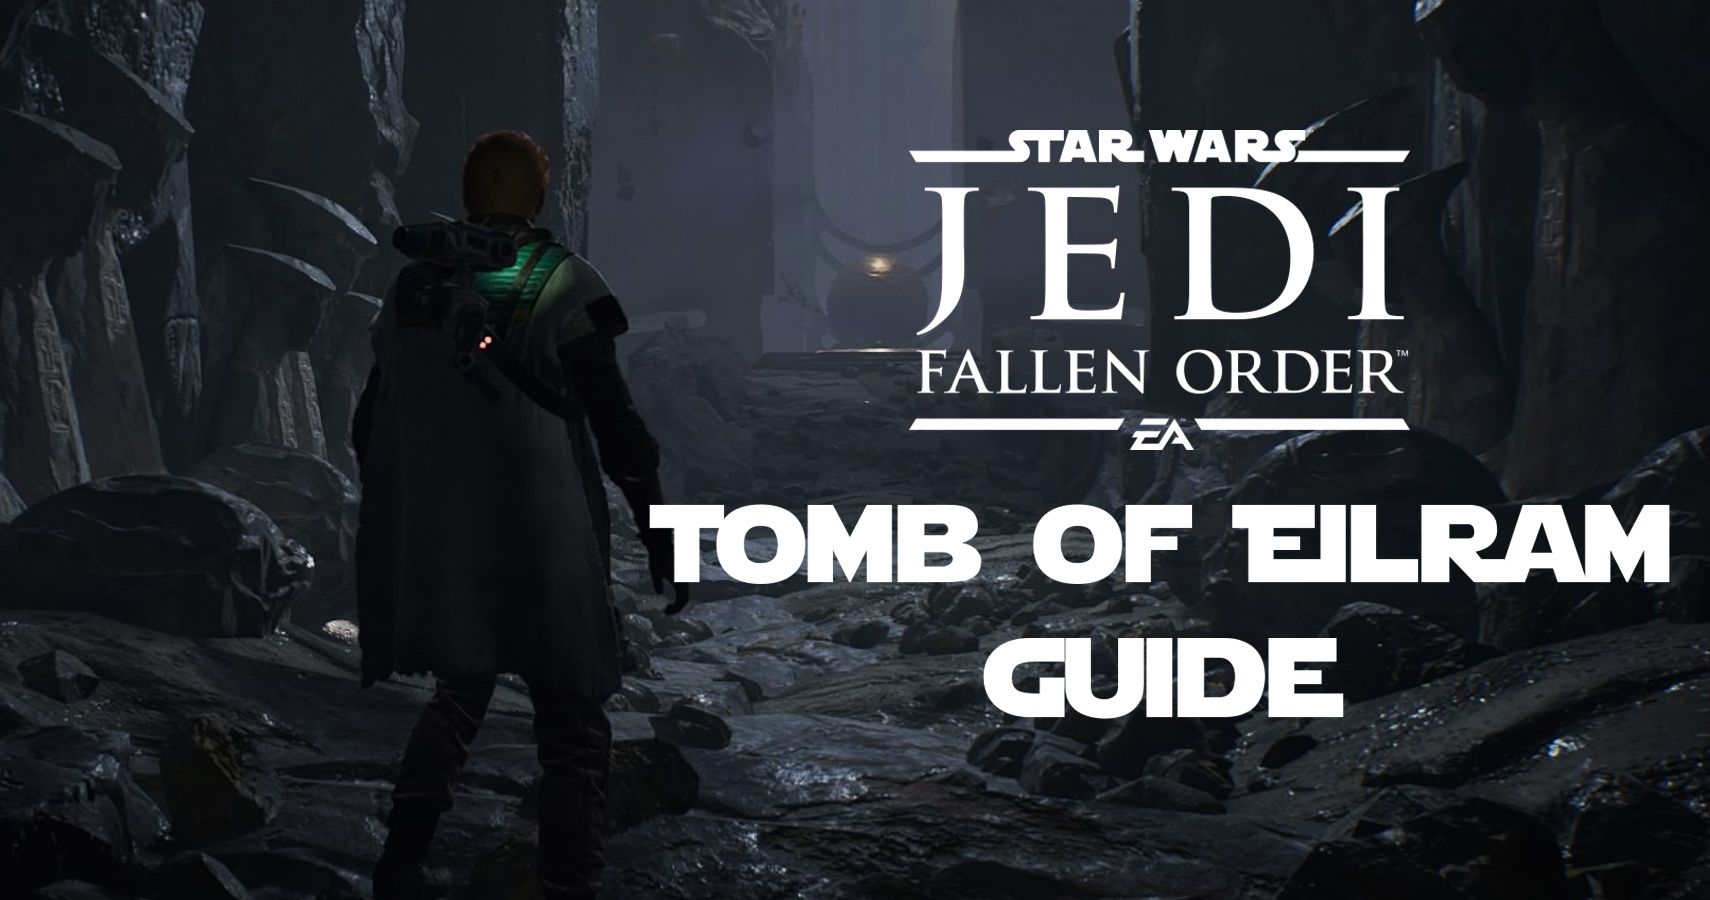 Star Wars Jedi: Fallen Order tips for combat and more - Polygon